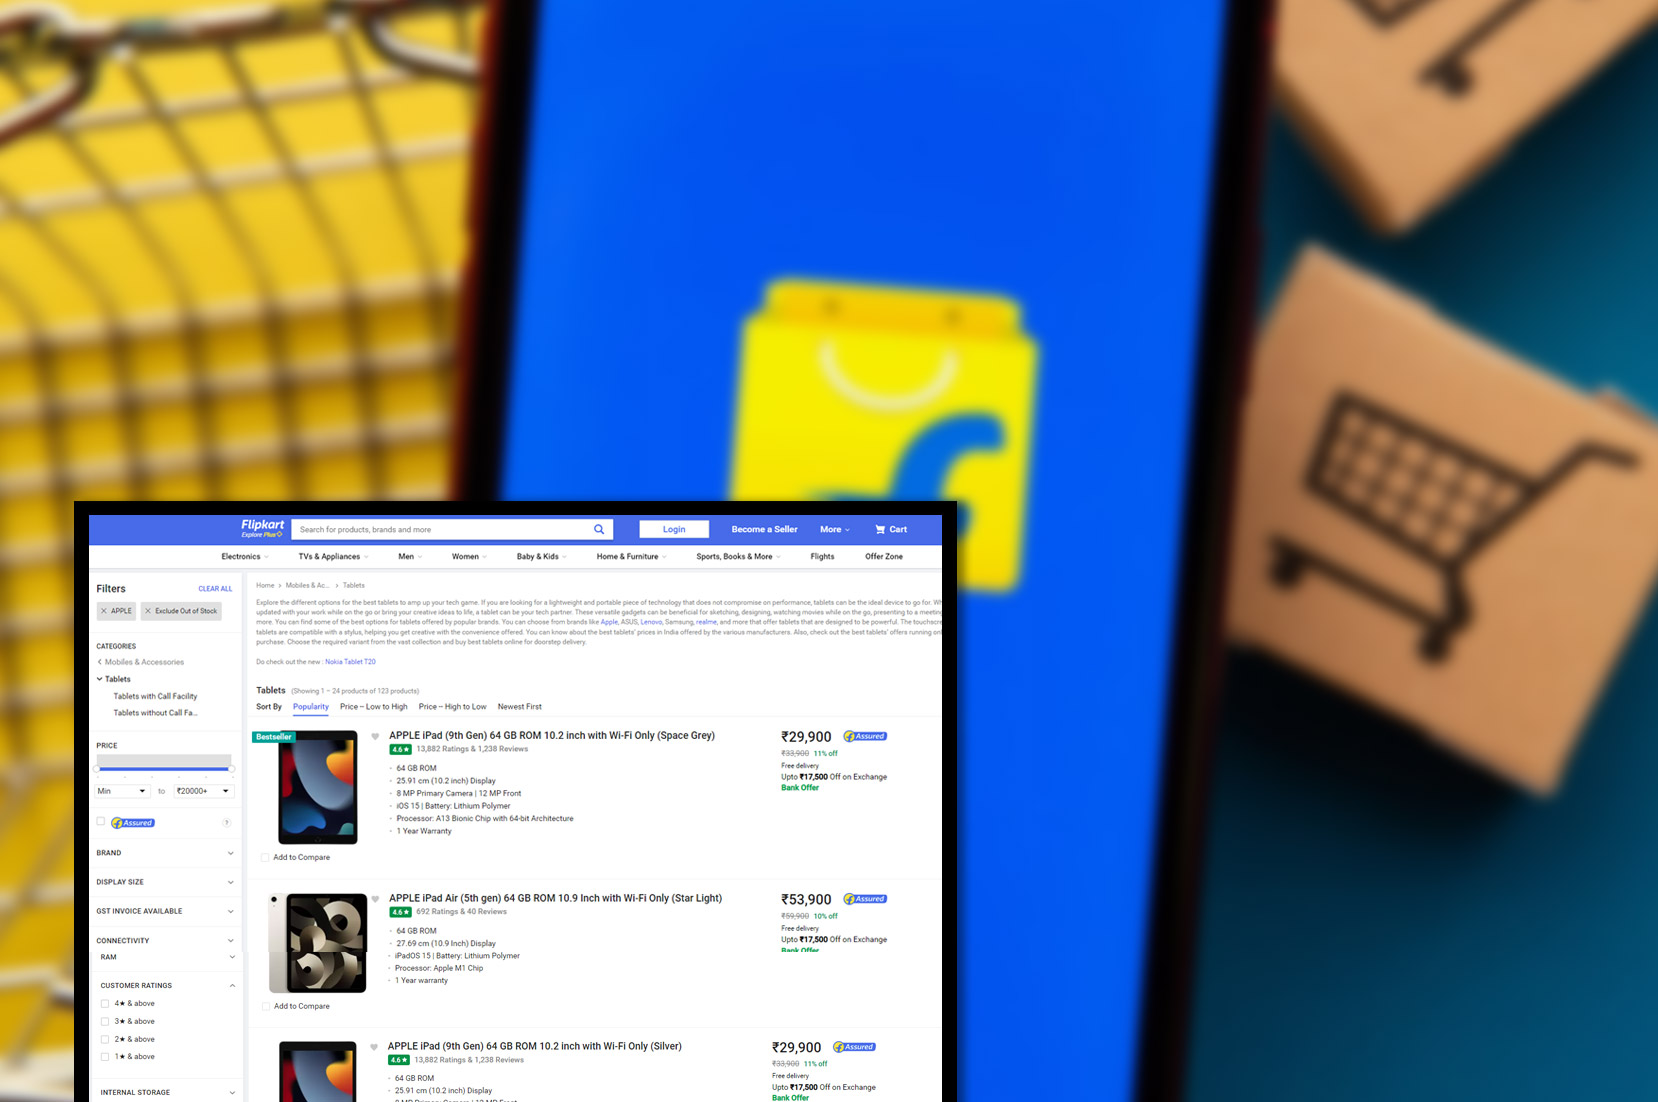 flipkart-comproduct-pricing-information-and-image-scraping-services